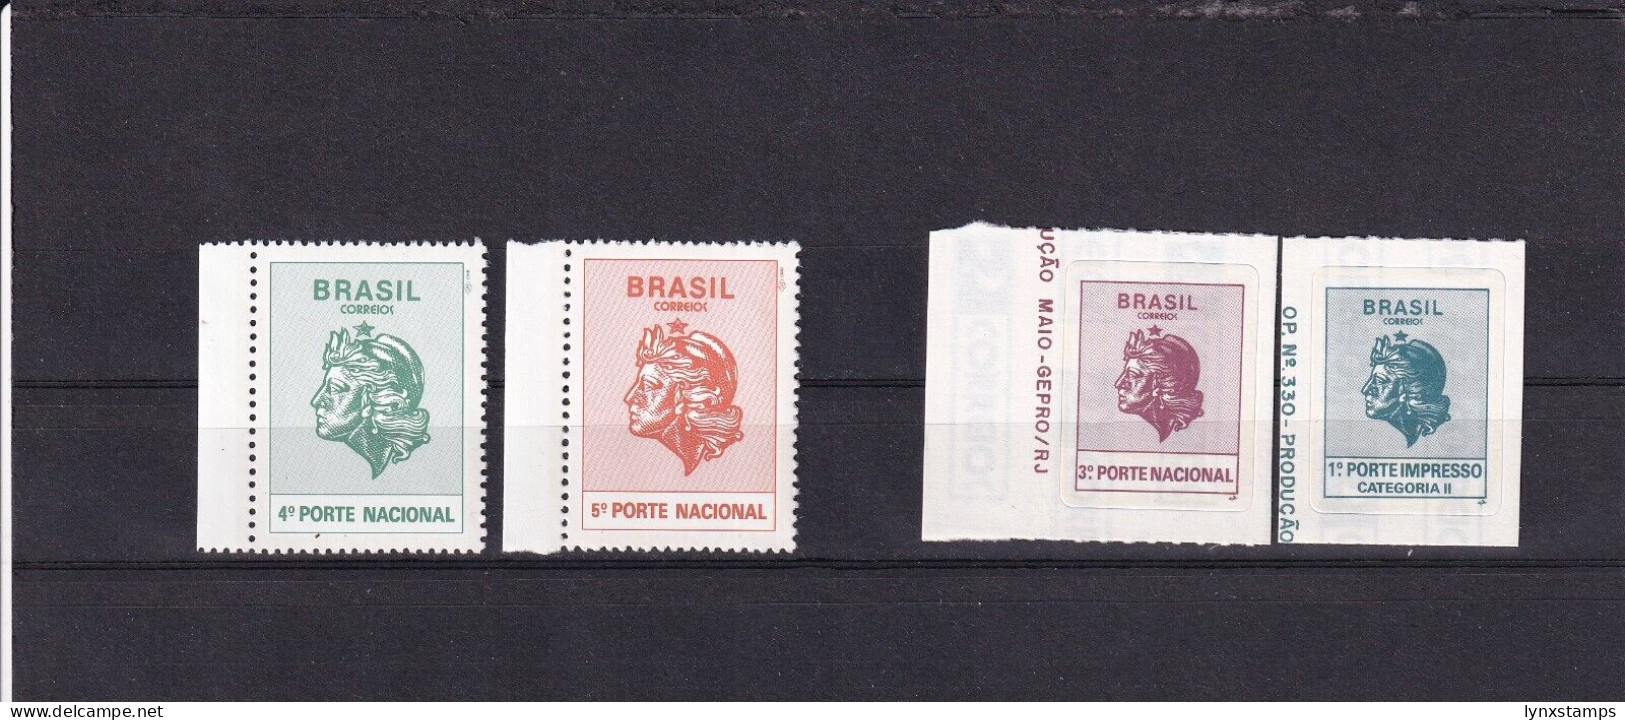 SA06 Brazil 1994 Stamps With No Value Expressed, 2 Self-adhesive - Neufs